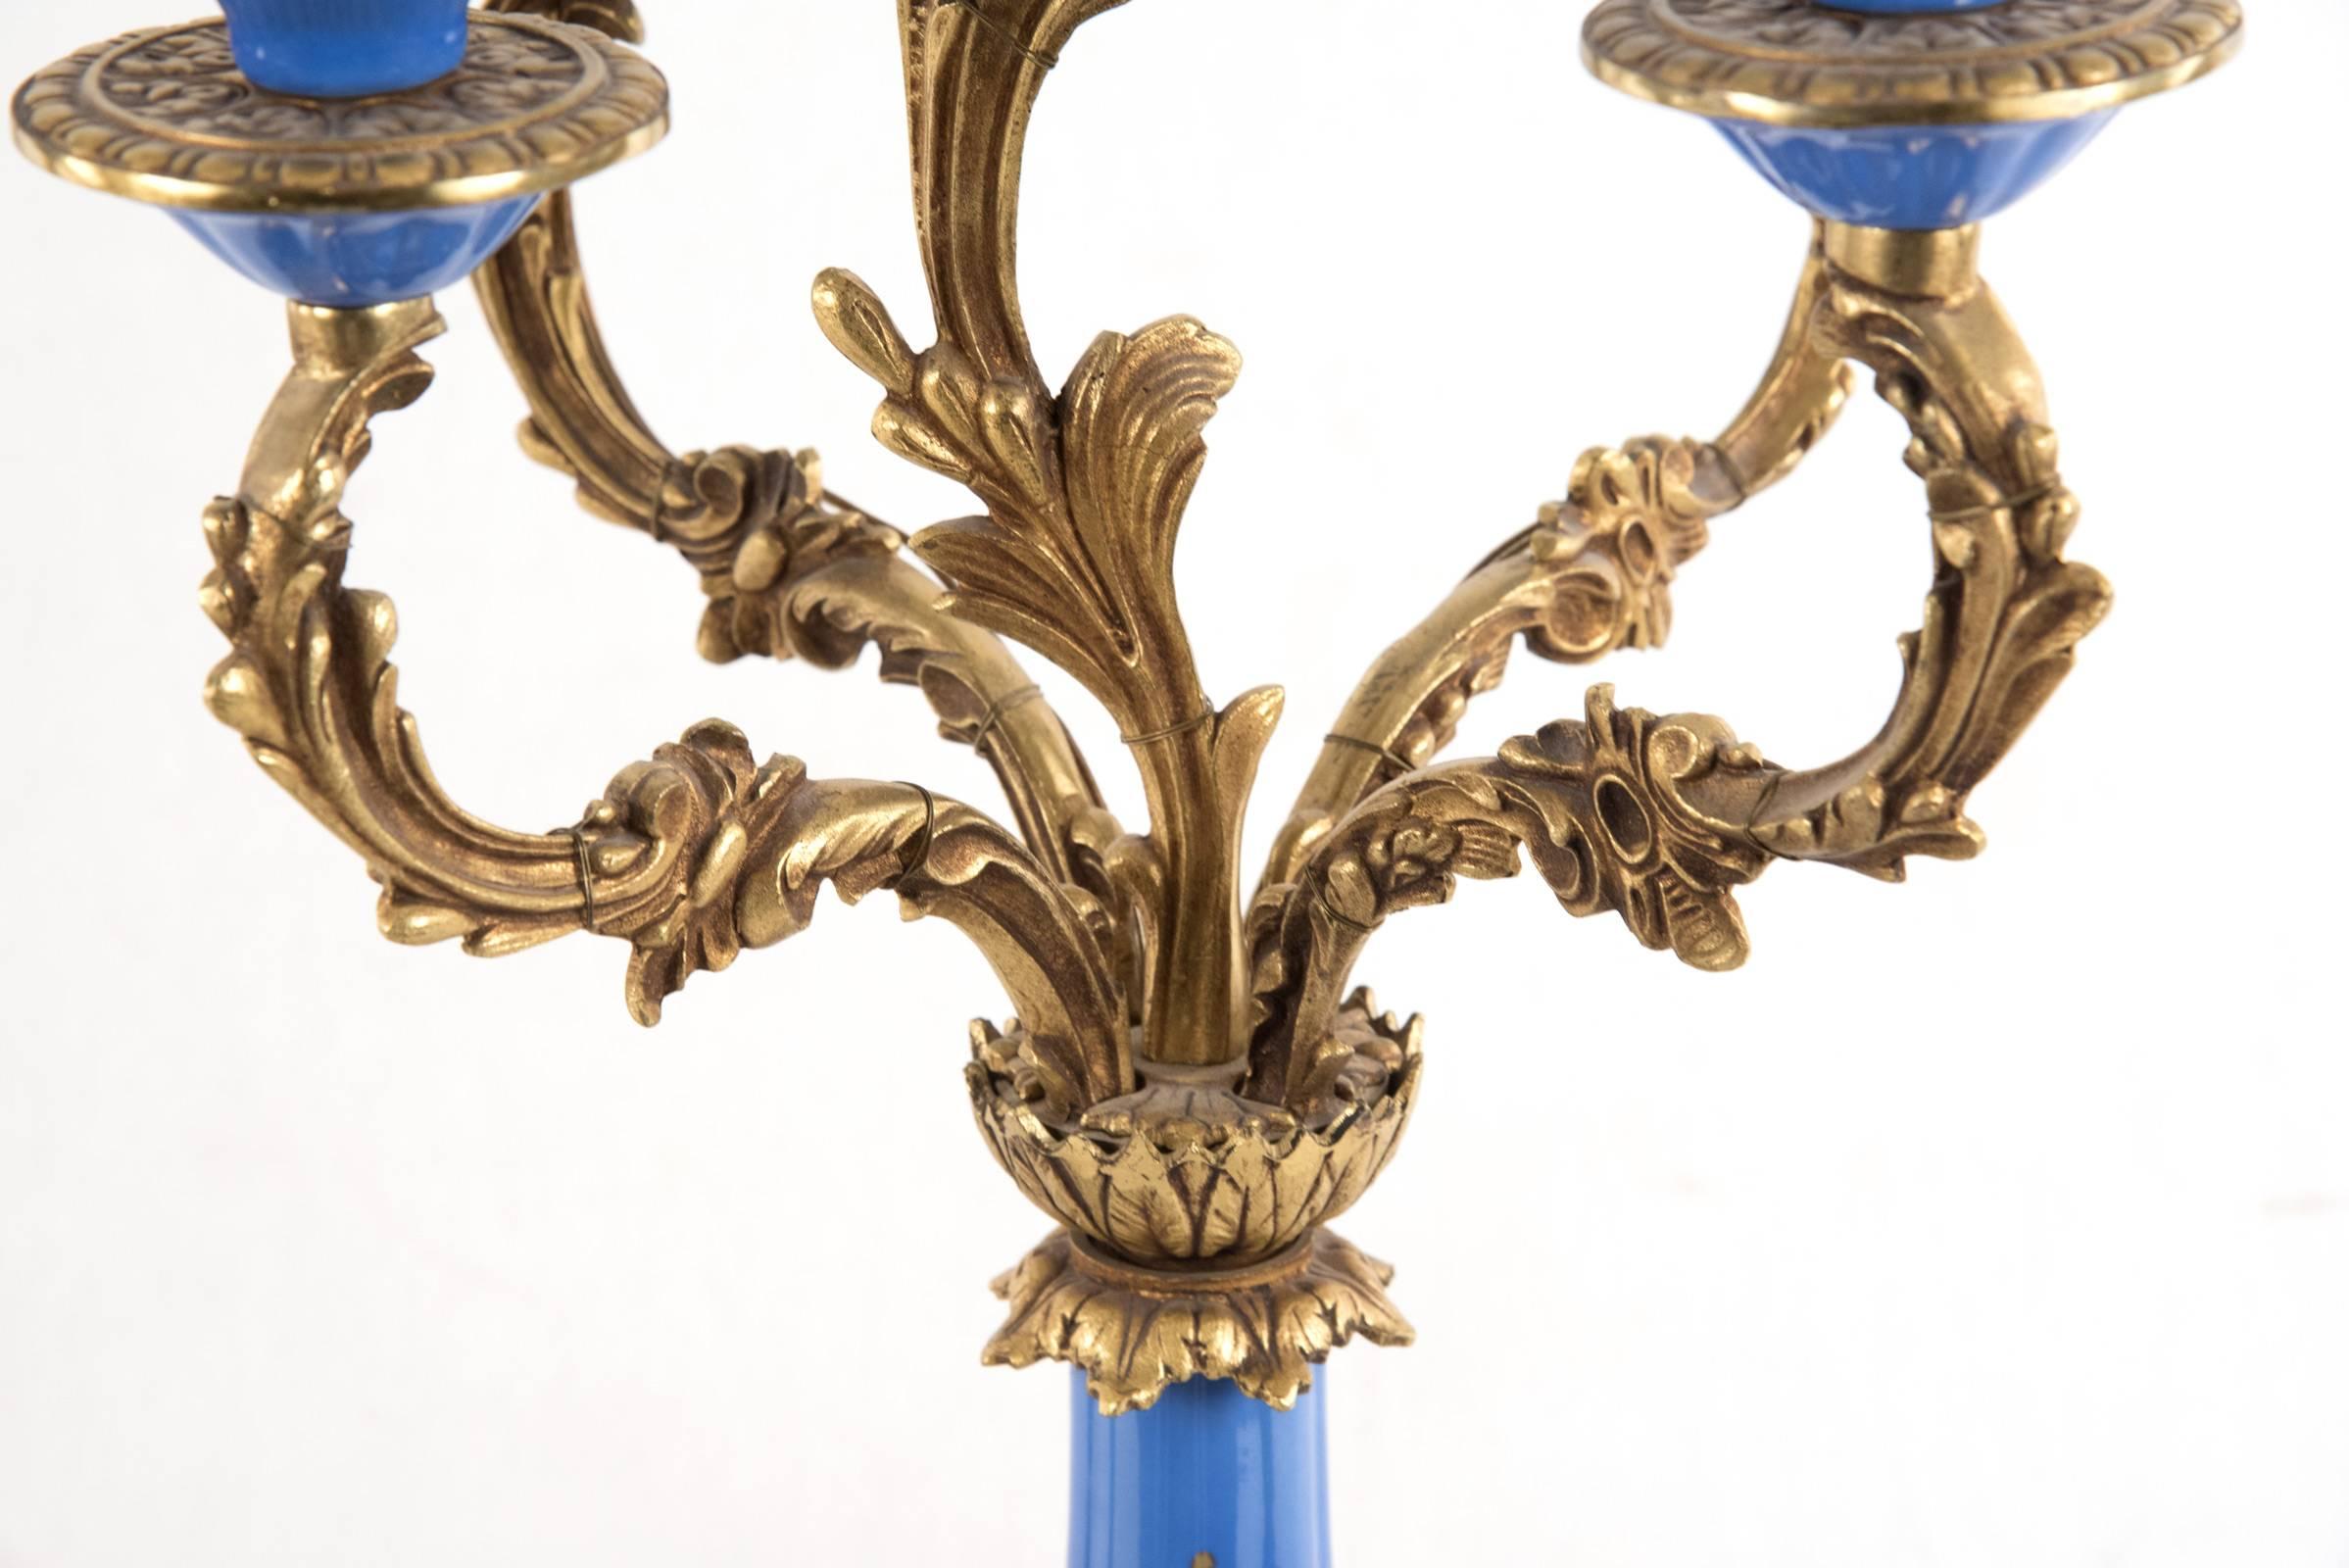 French Sevres-Style Porcelain and Ormolu-Mounted Five-Light Candelabra